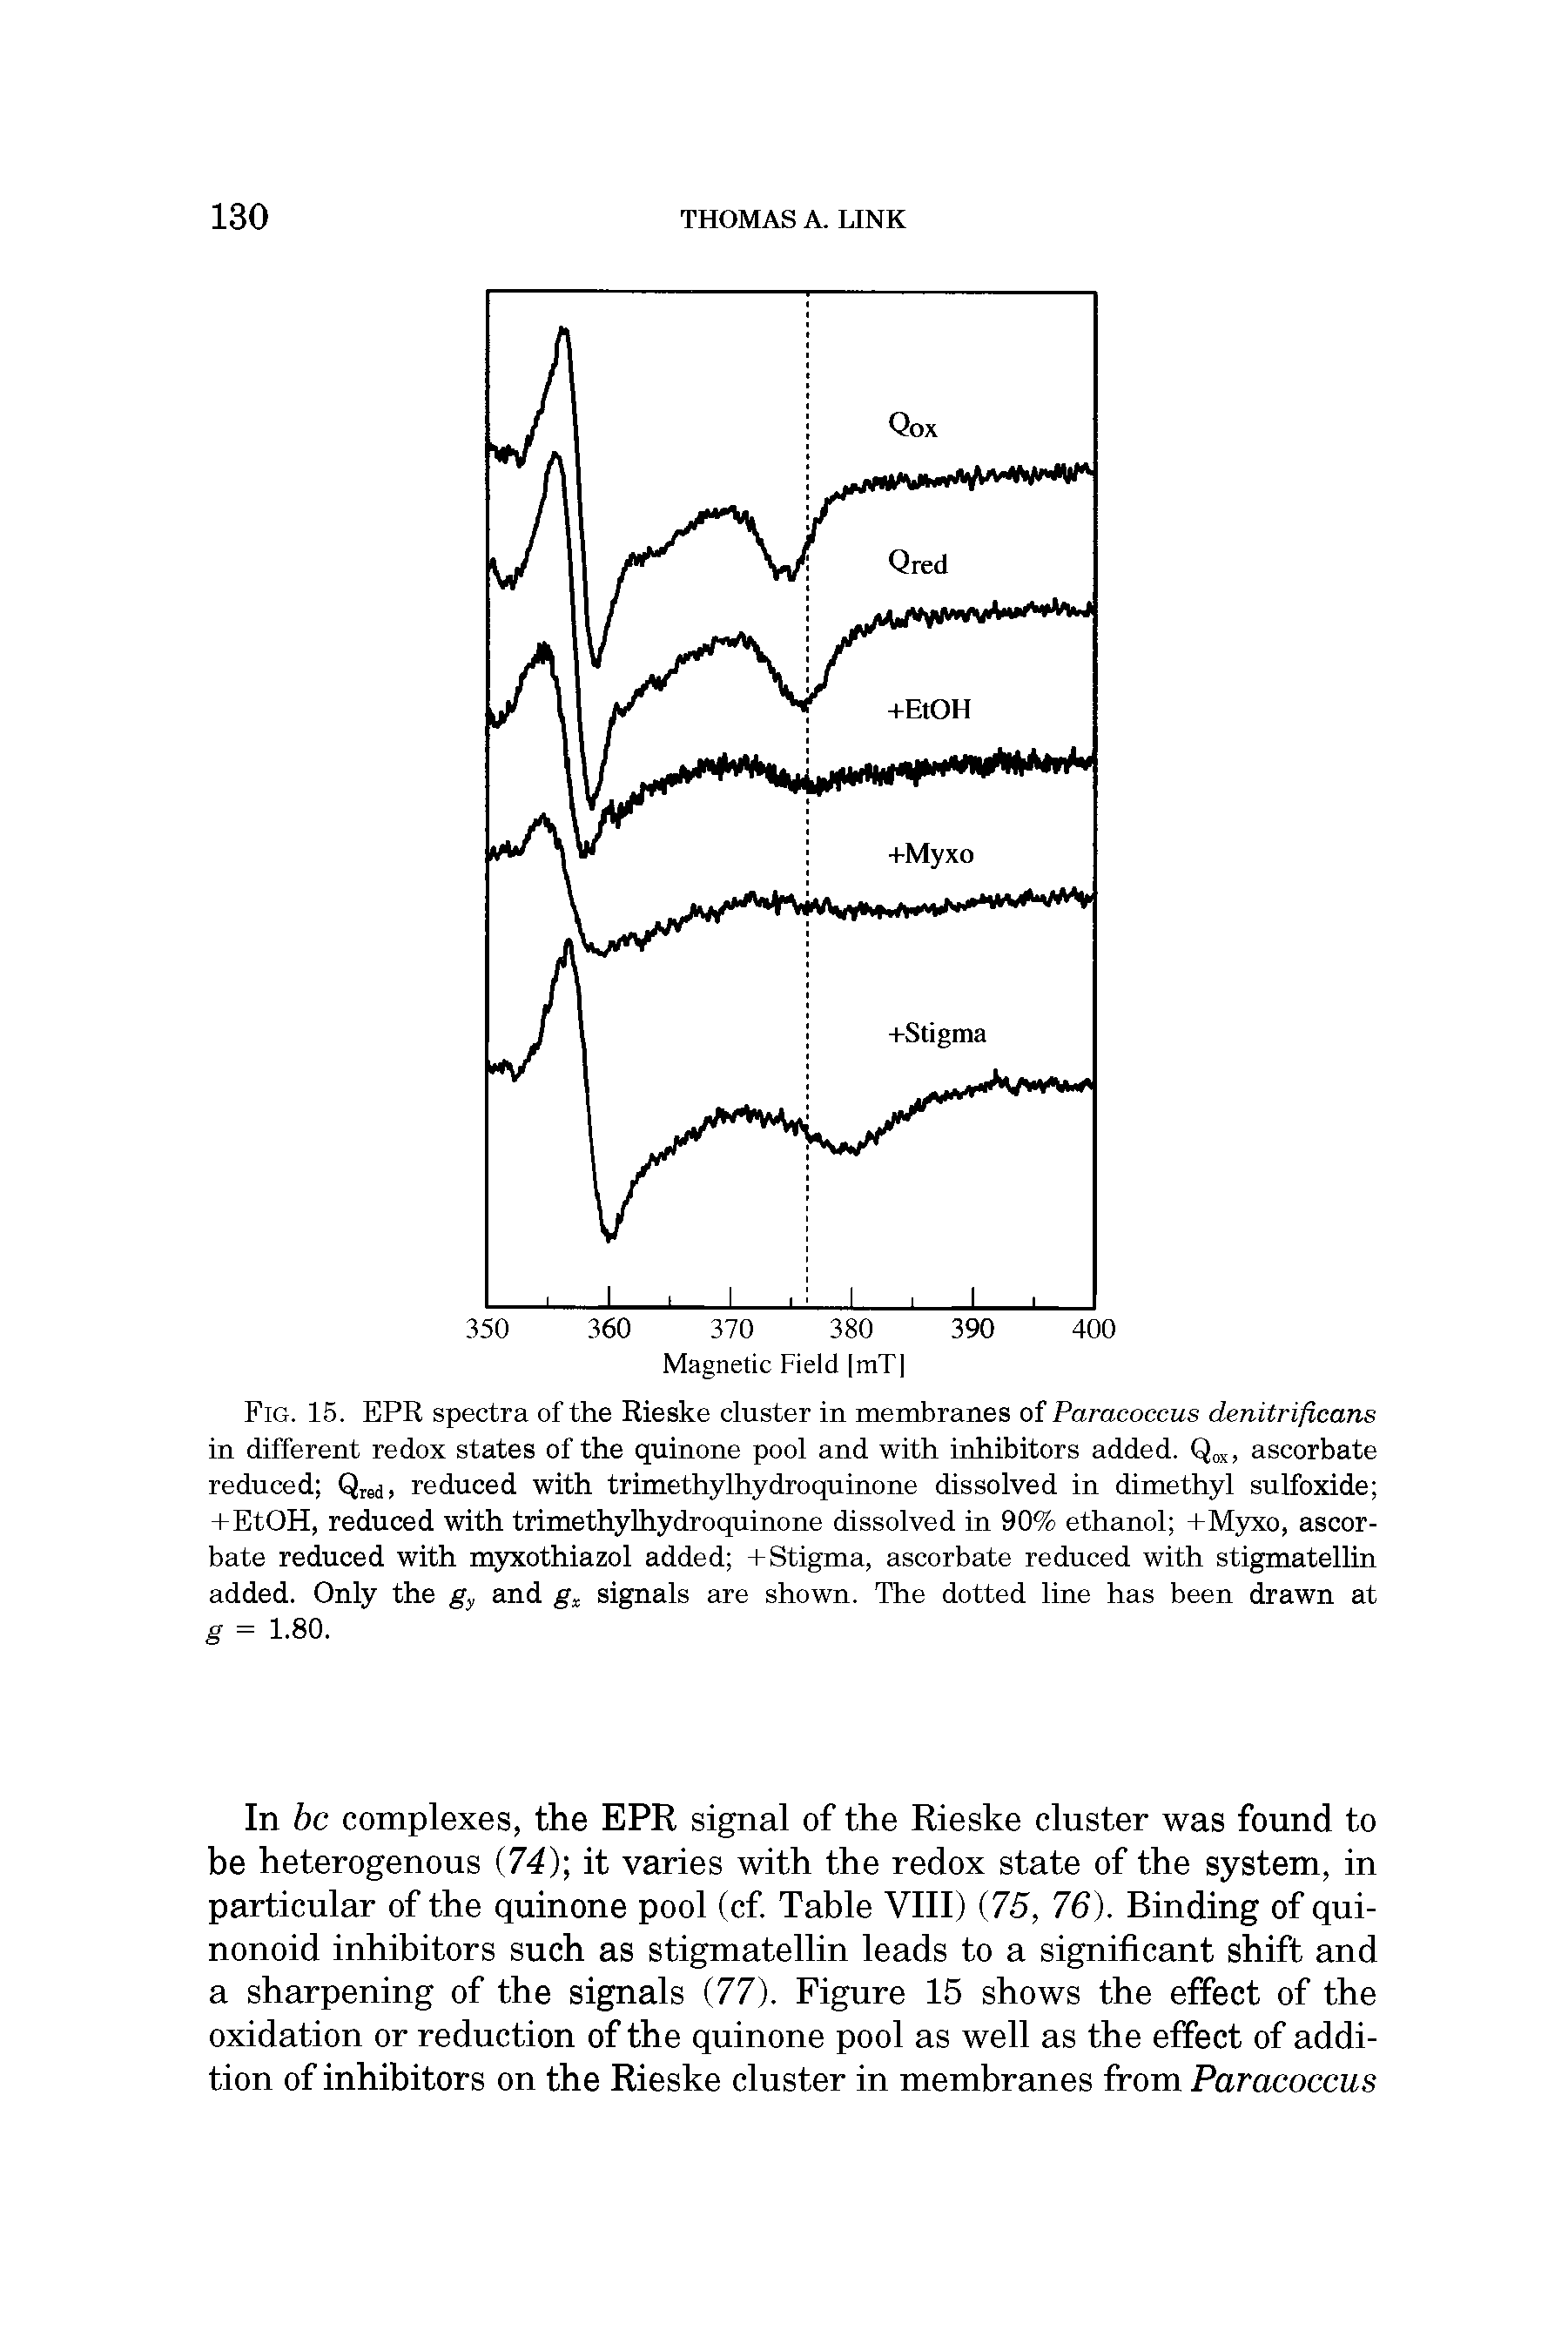 Fig. 15. EPR spectra of the Rieske cluster in membranes of Paracoccus denitrificans in different redox states of the quinone pool and with inhibitors added. Q x, ascorbate reduced Qred) reduced with trimethylhydroquinone dissolved in dimethyl sulfoxide +EtOH, reduced with trimethylhydroquinone dissolved in 90% ethanol +Myxo, ascorbate reduced with myxothiazol added + Stigma, ascorbate reduced with stigmatellin added. Only the gy and signals are shown. The dotted line has been drawn at...